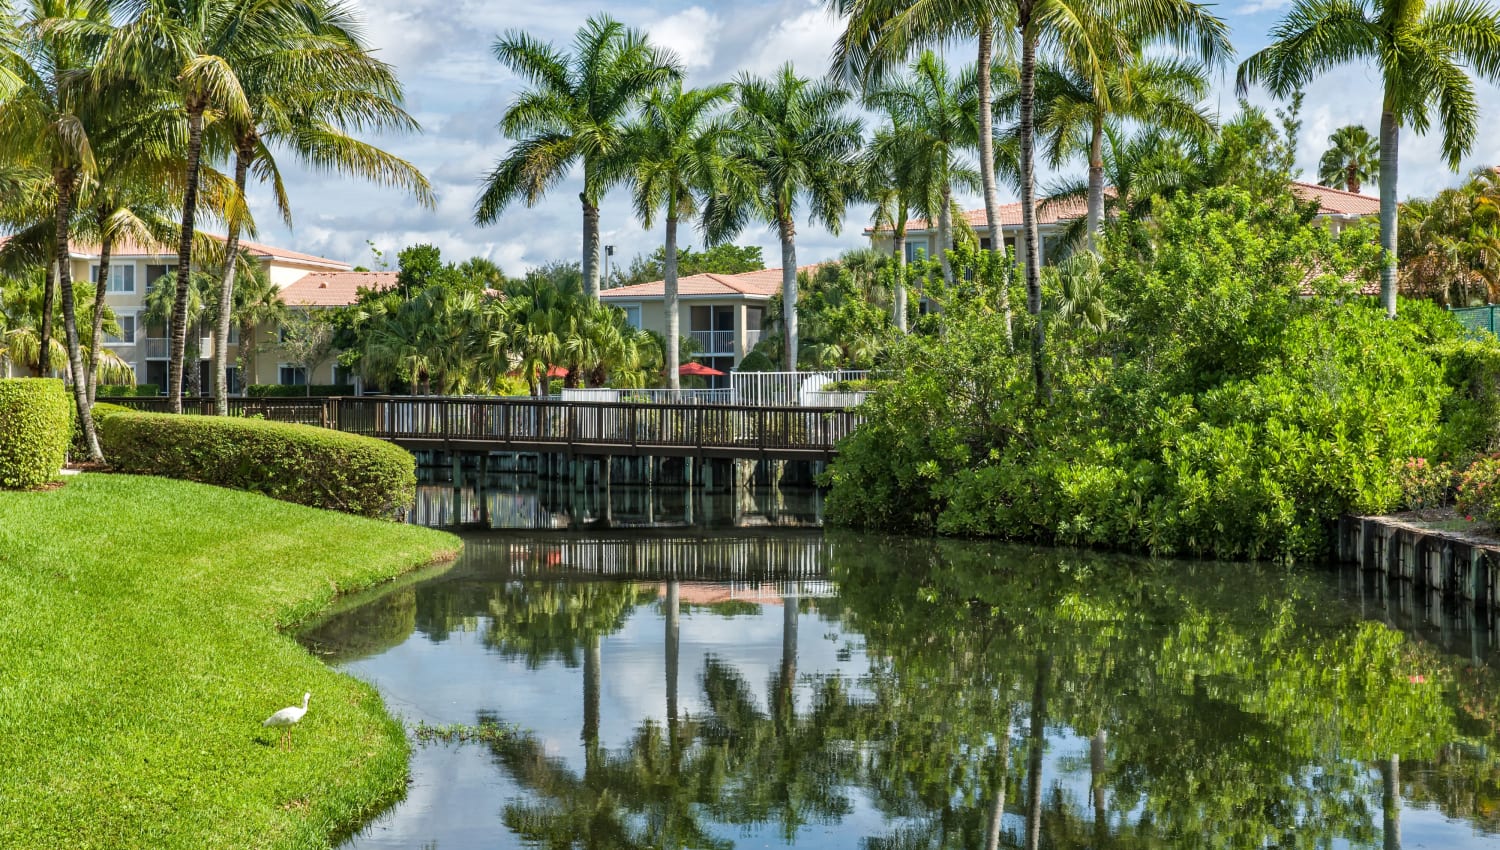 Lake at Ibis Reserve Apartments in West Palm Beach, Florida